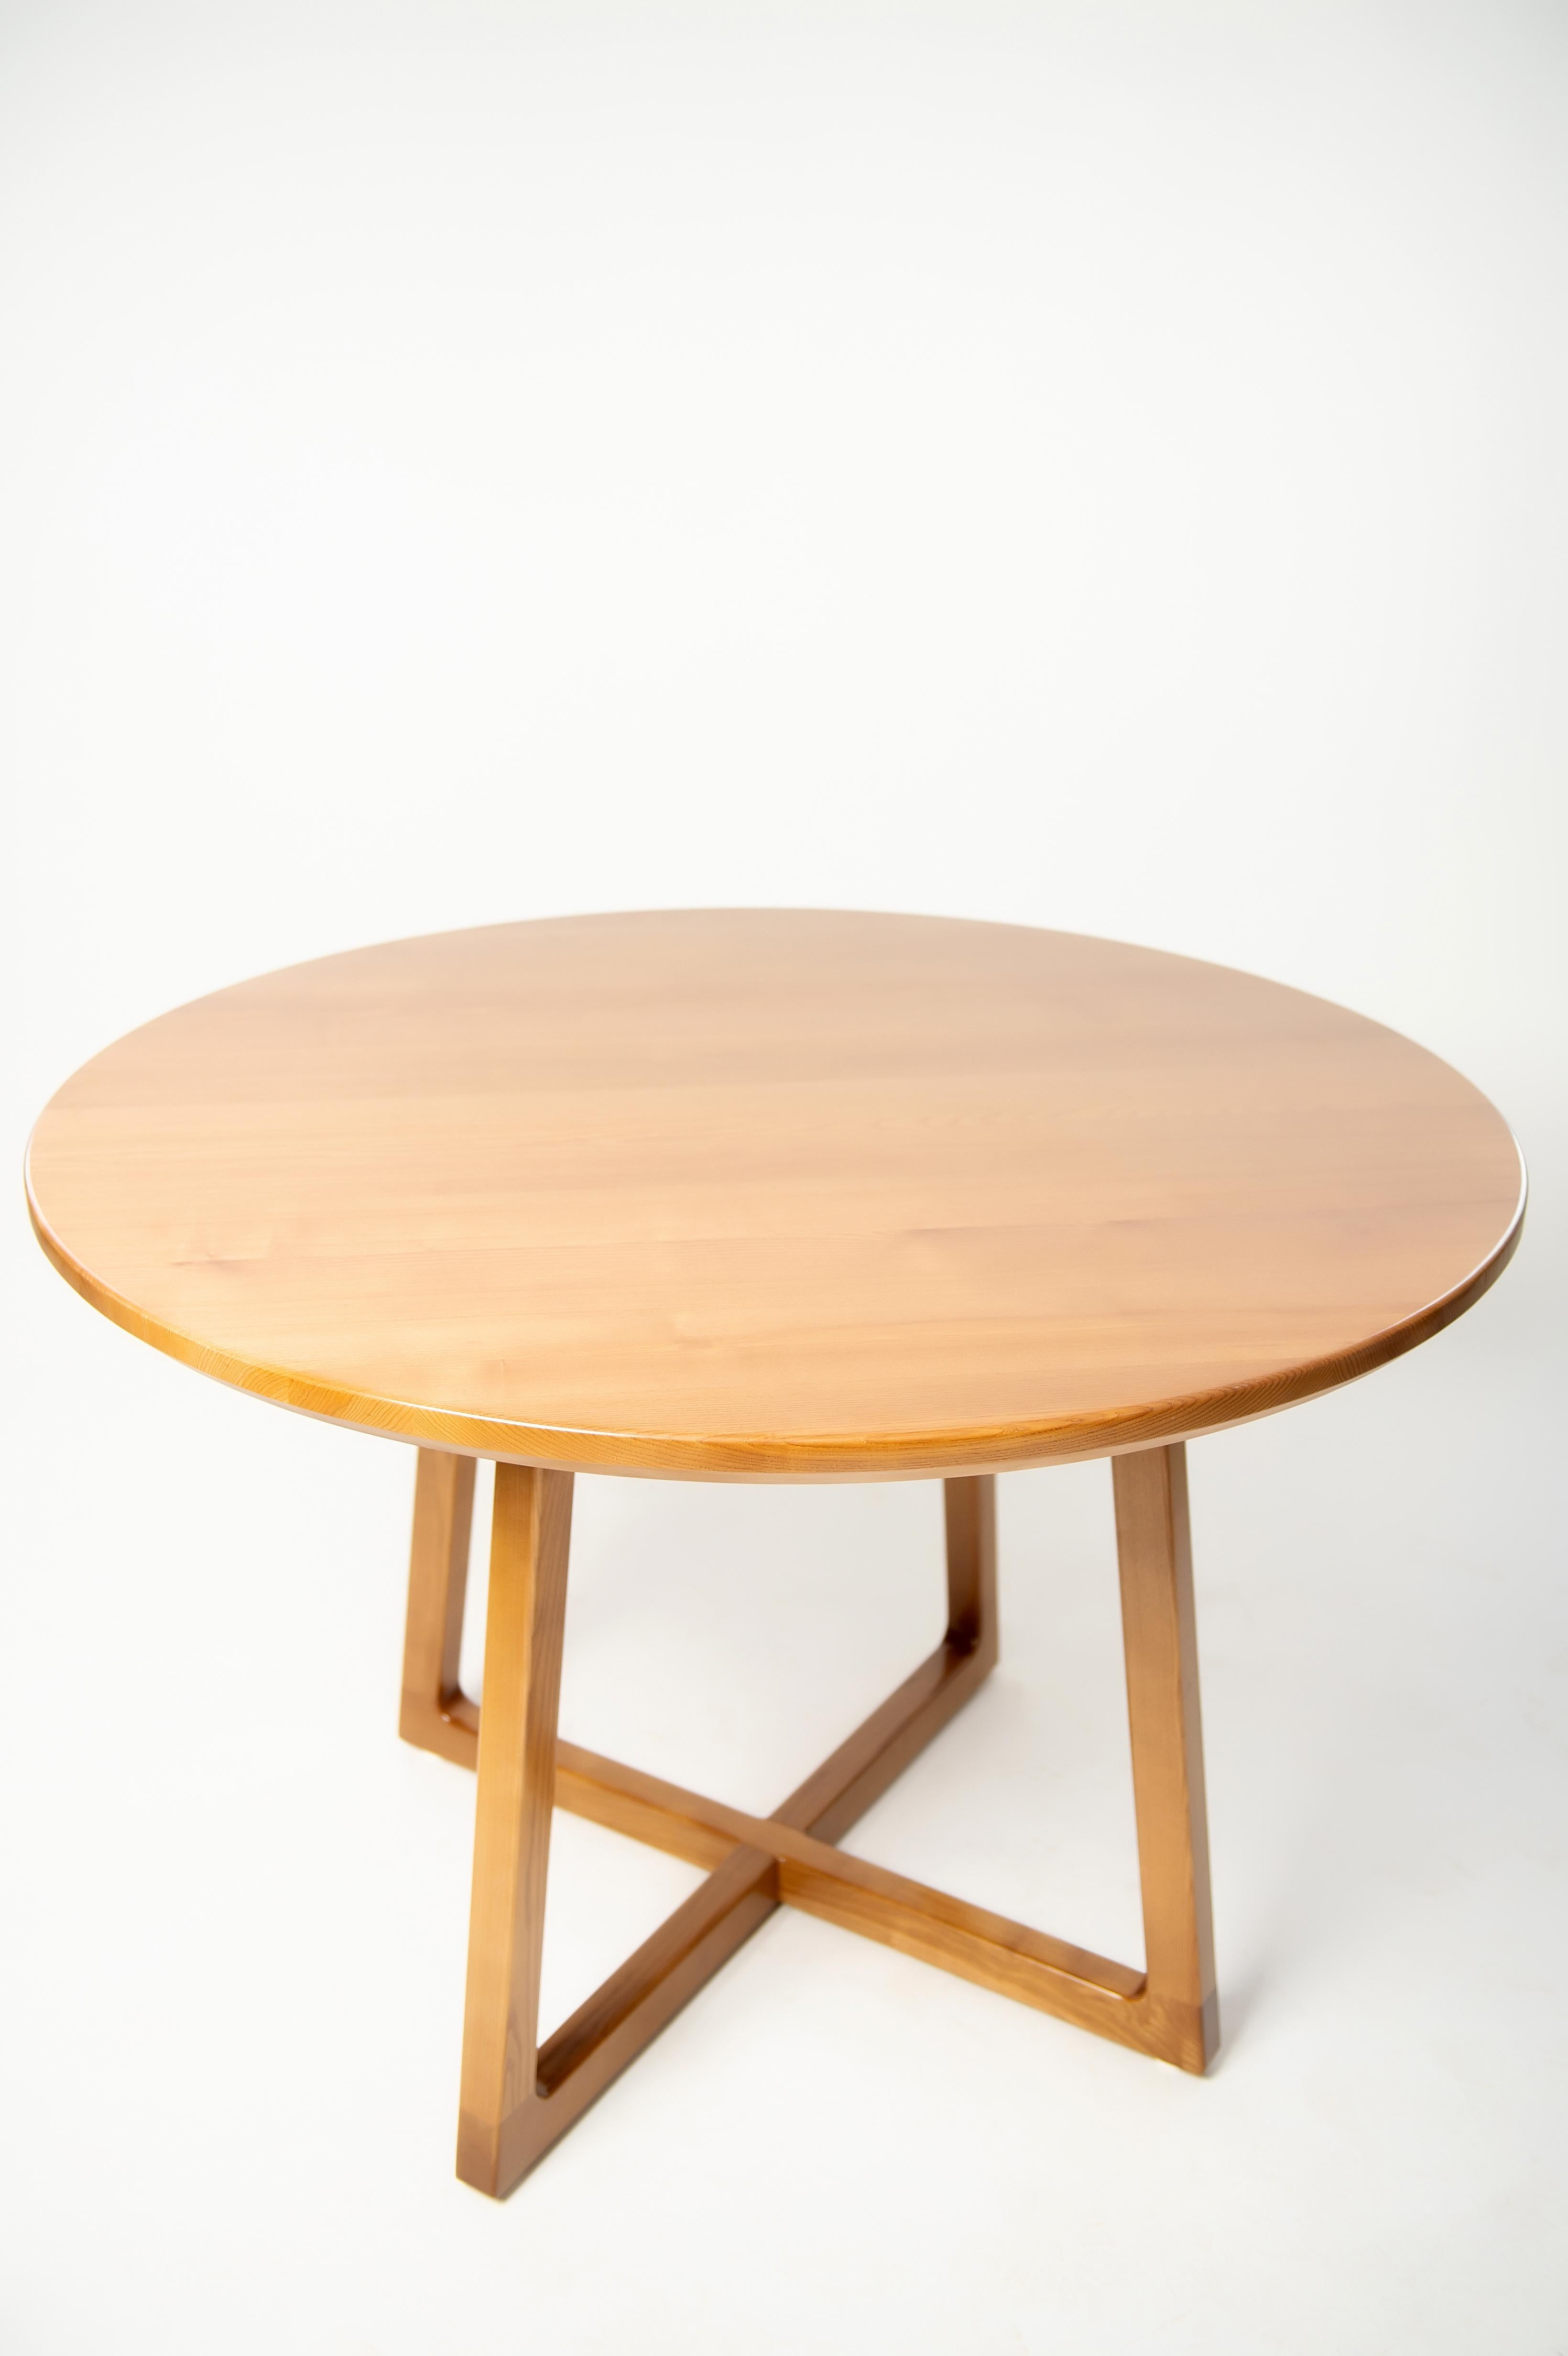 Moldovan Light Brown Ash Solid Wood Round Dining Table For Sale